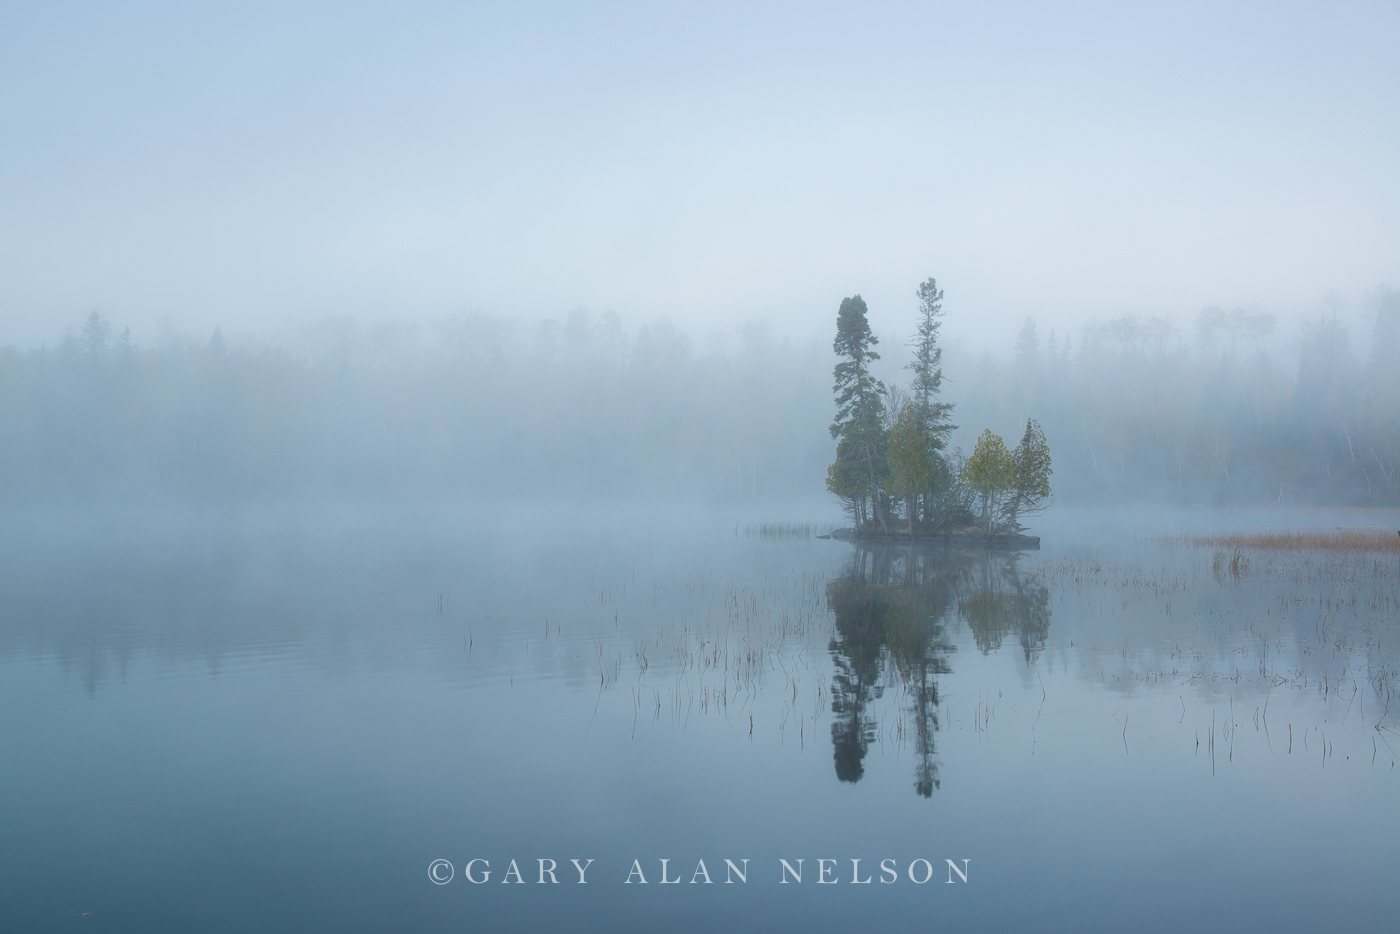 Island and fog at dawn, Superior National Forest, Minnesota